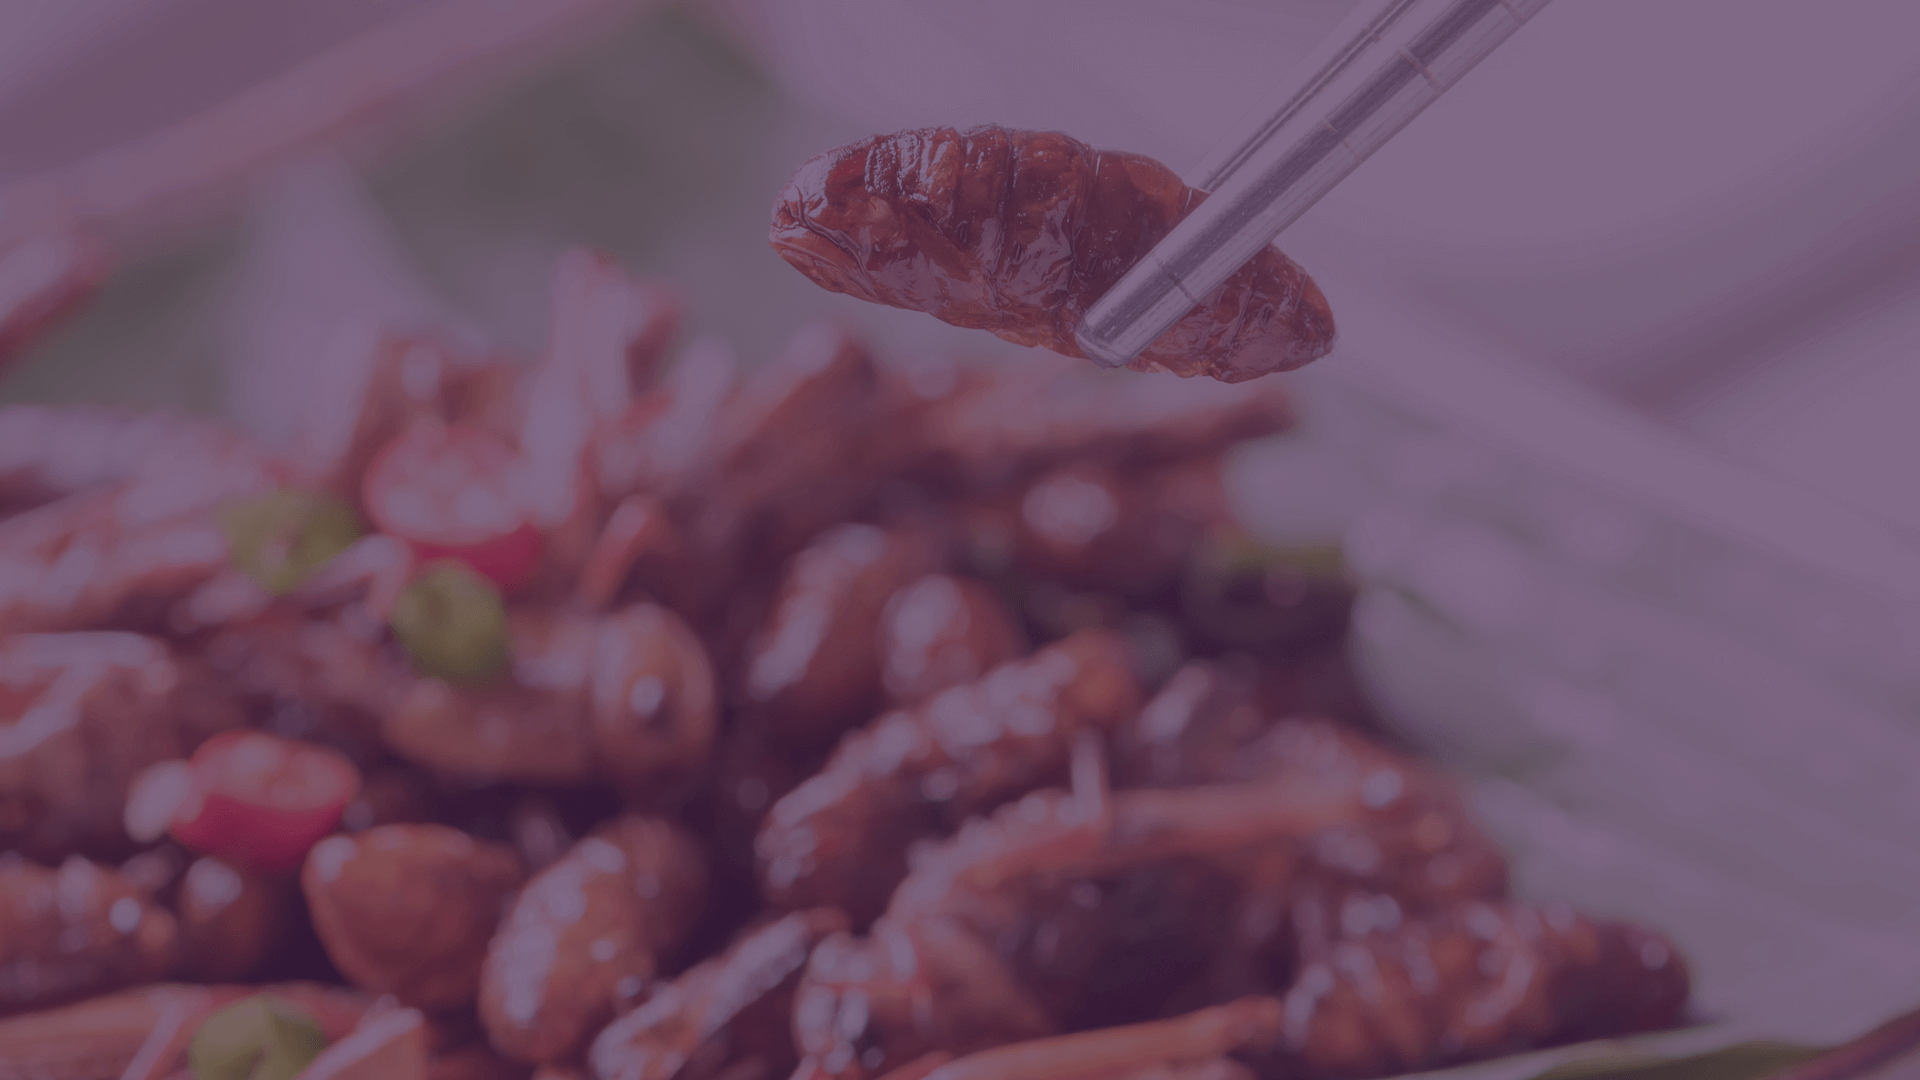 Are edible insects the way forward for sustainability and food security?